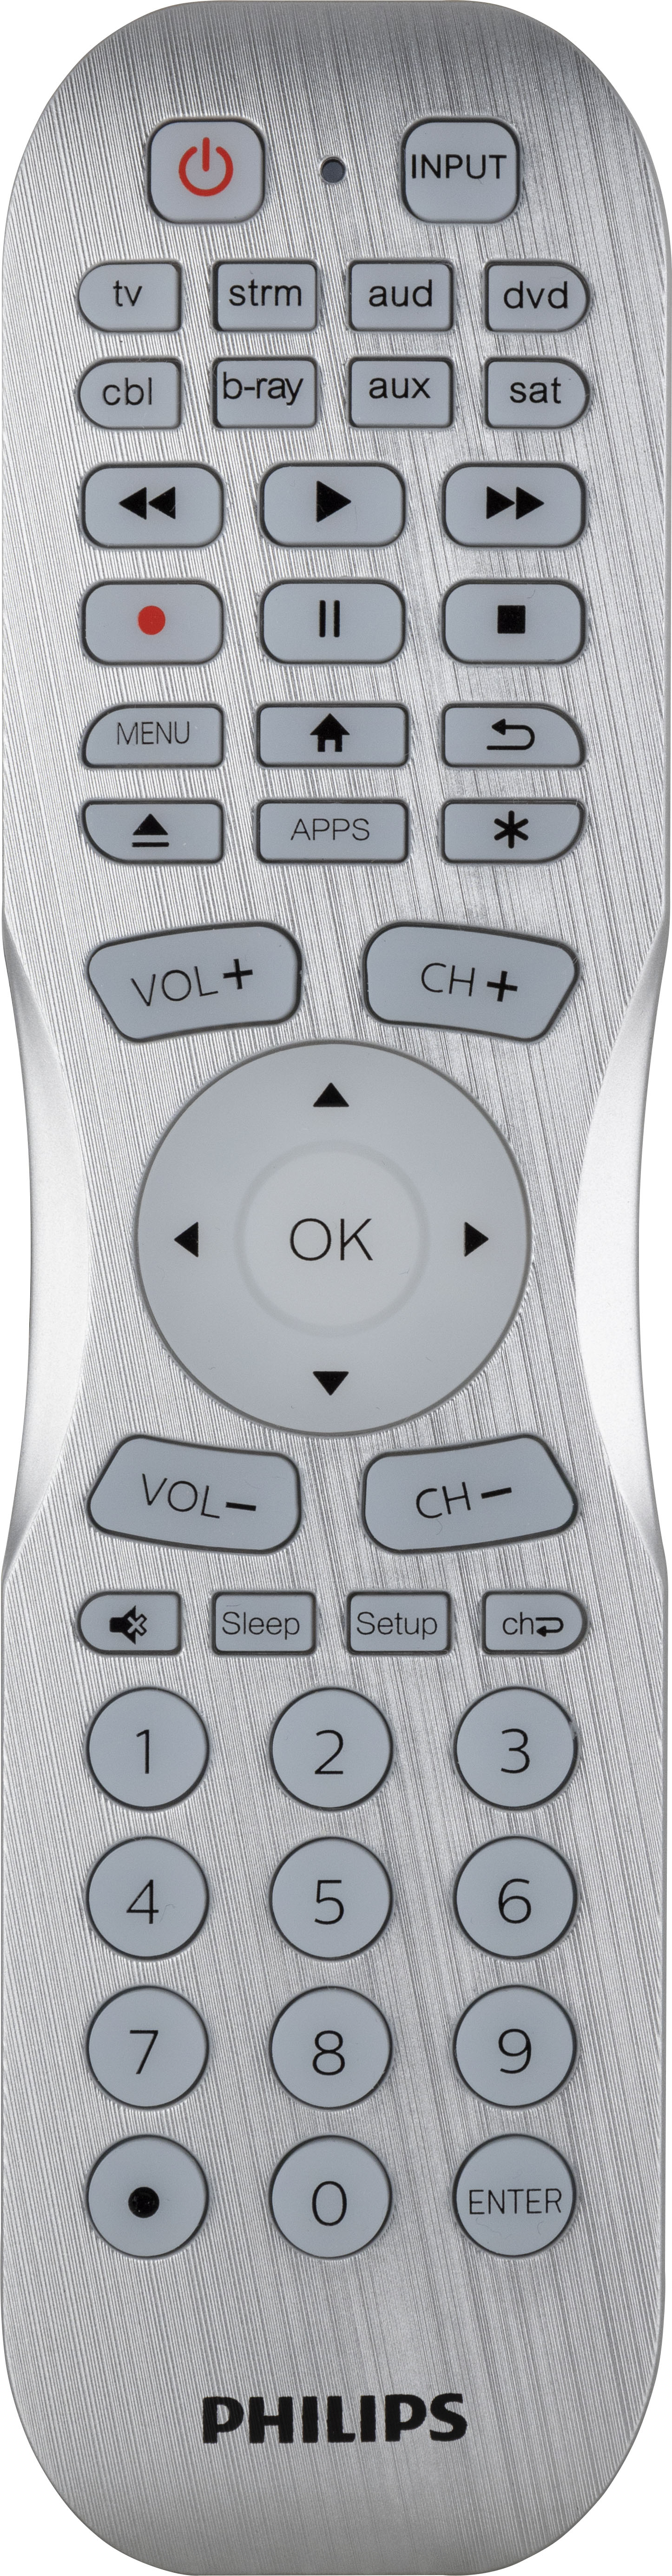 Philips - 8 Device Universal Remote Control Bluetooth Programmable, Backlit - Brushed Silver